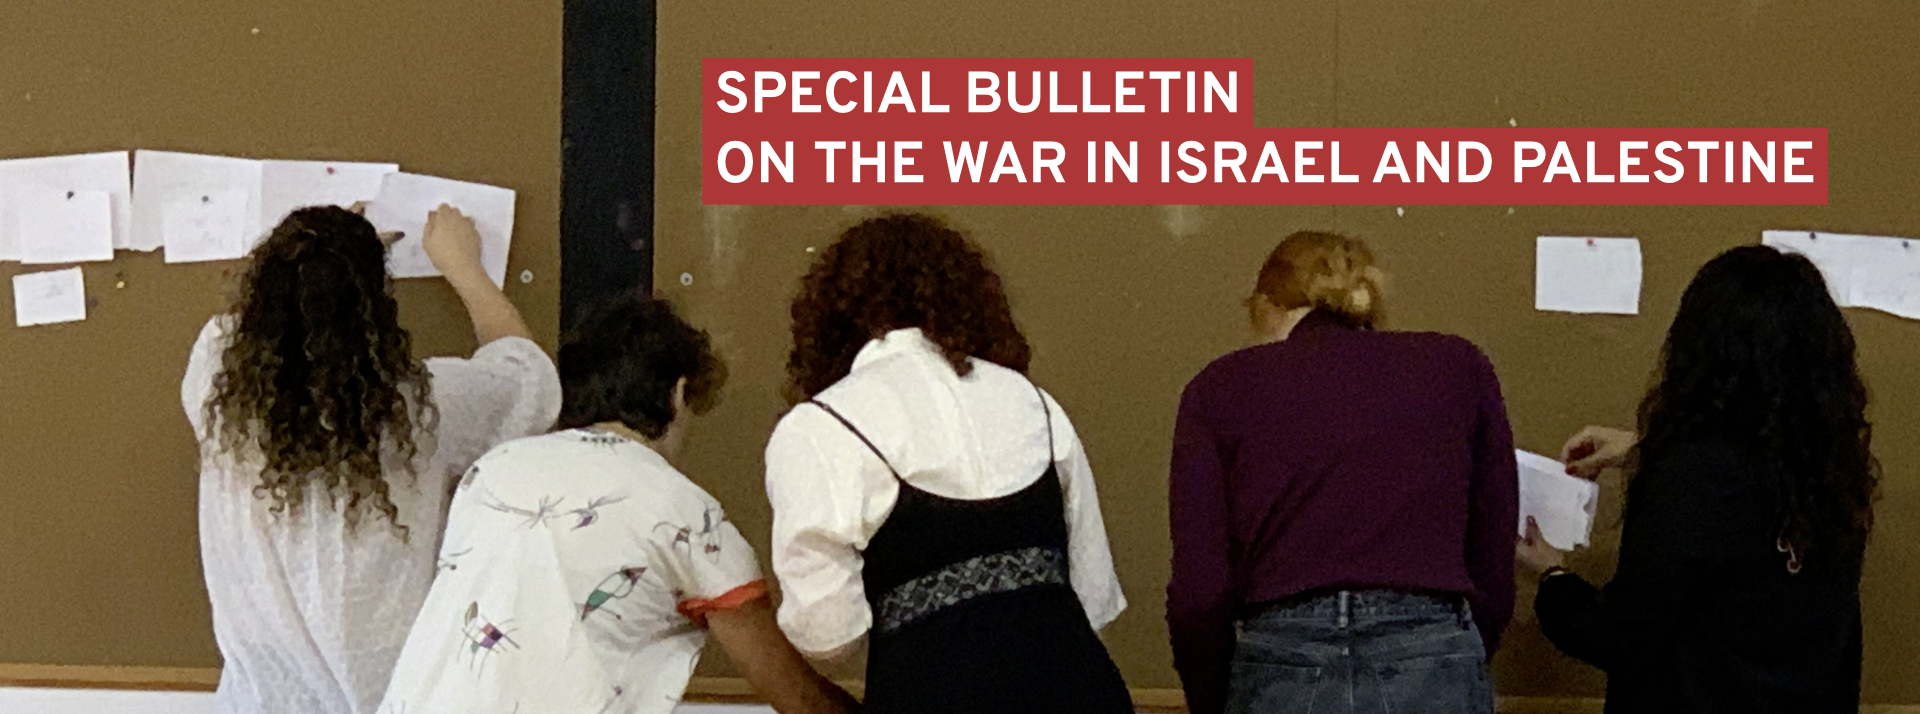 Special Bulletin on the war in Palestine and Israel